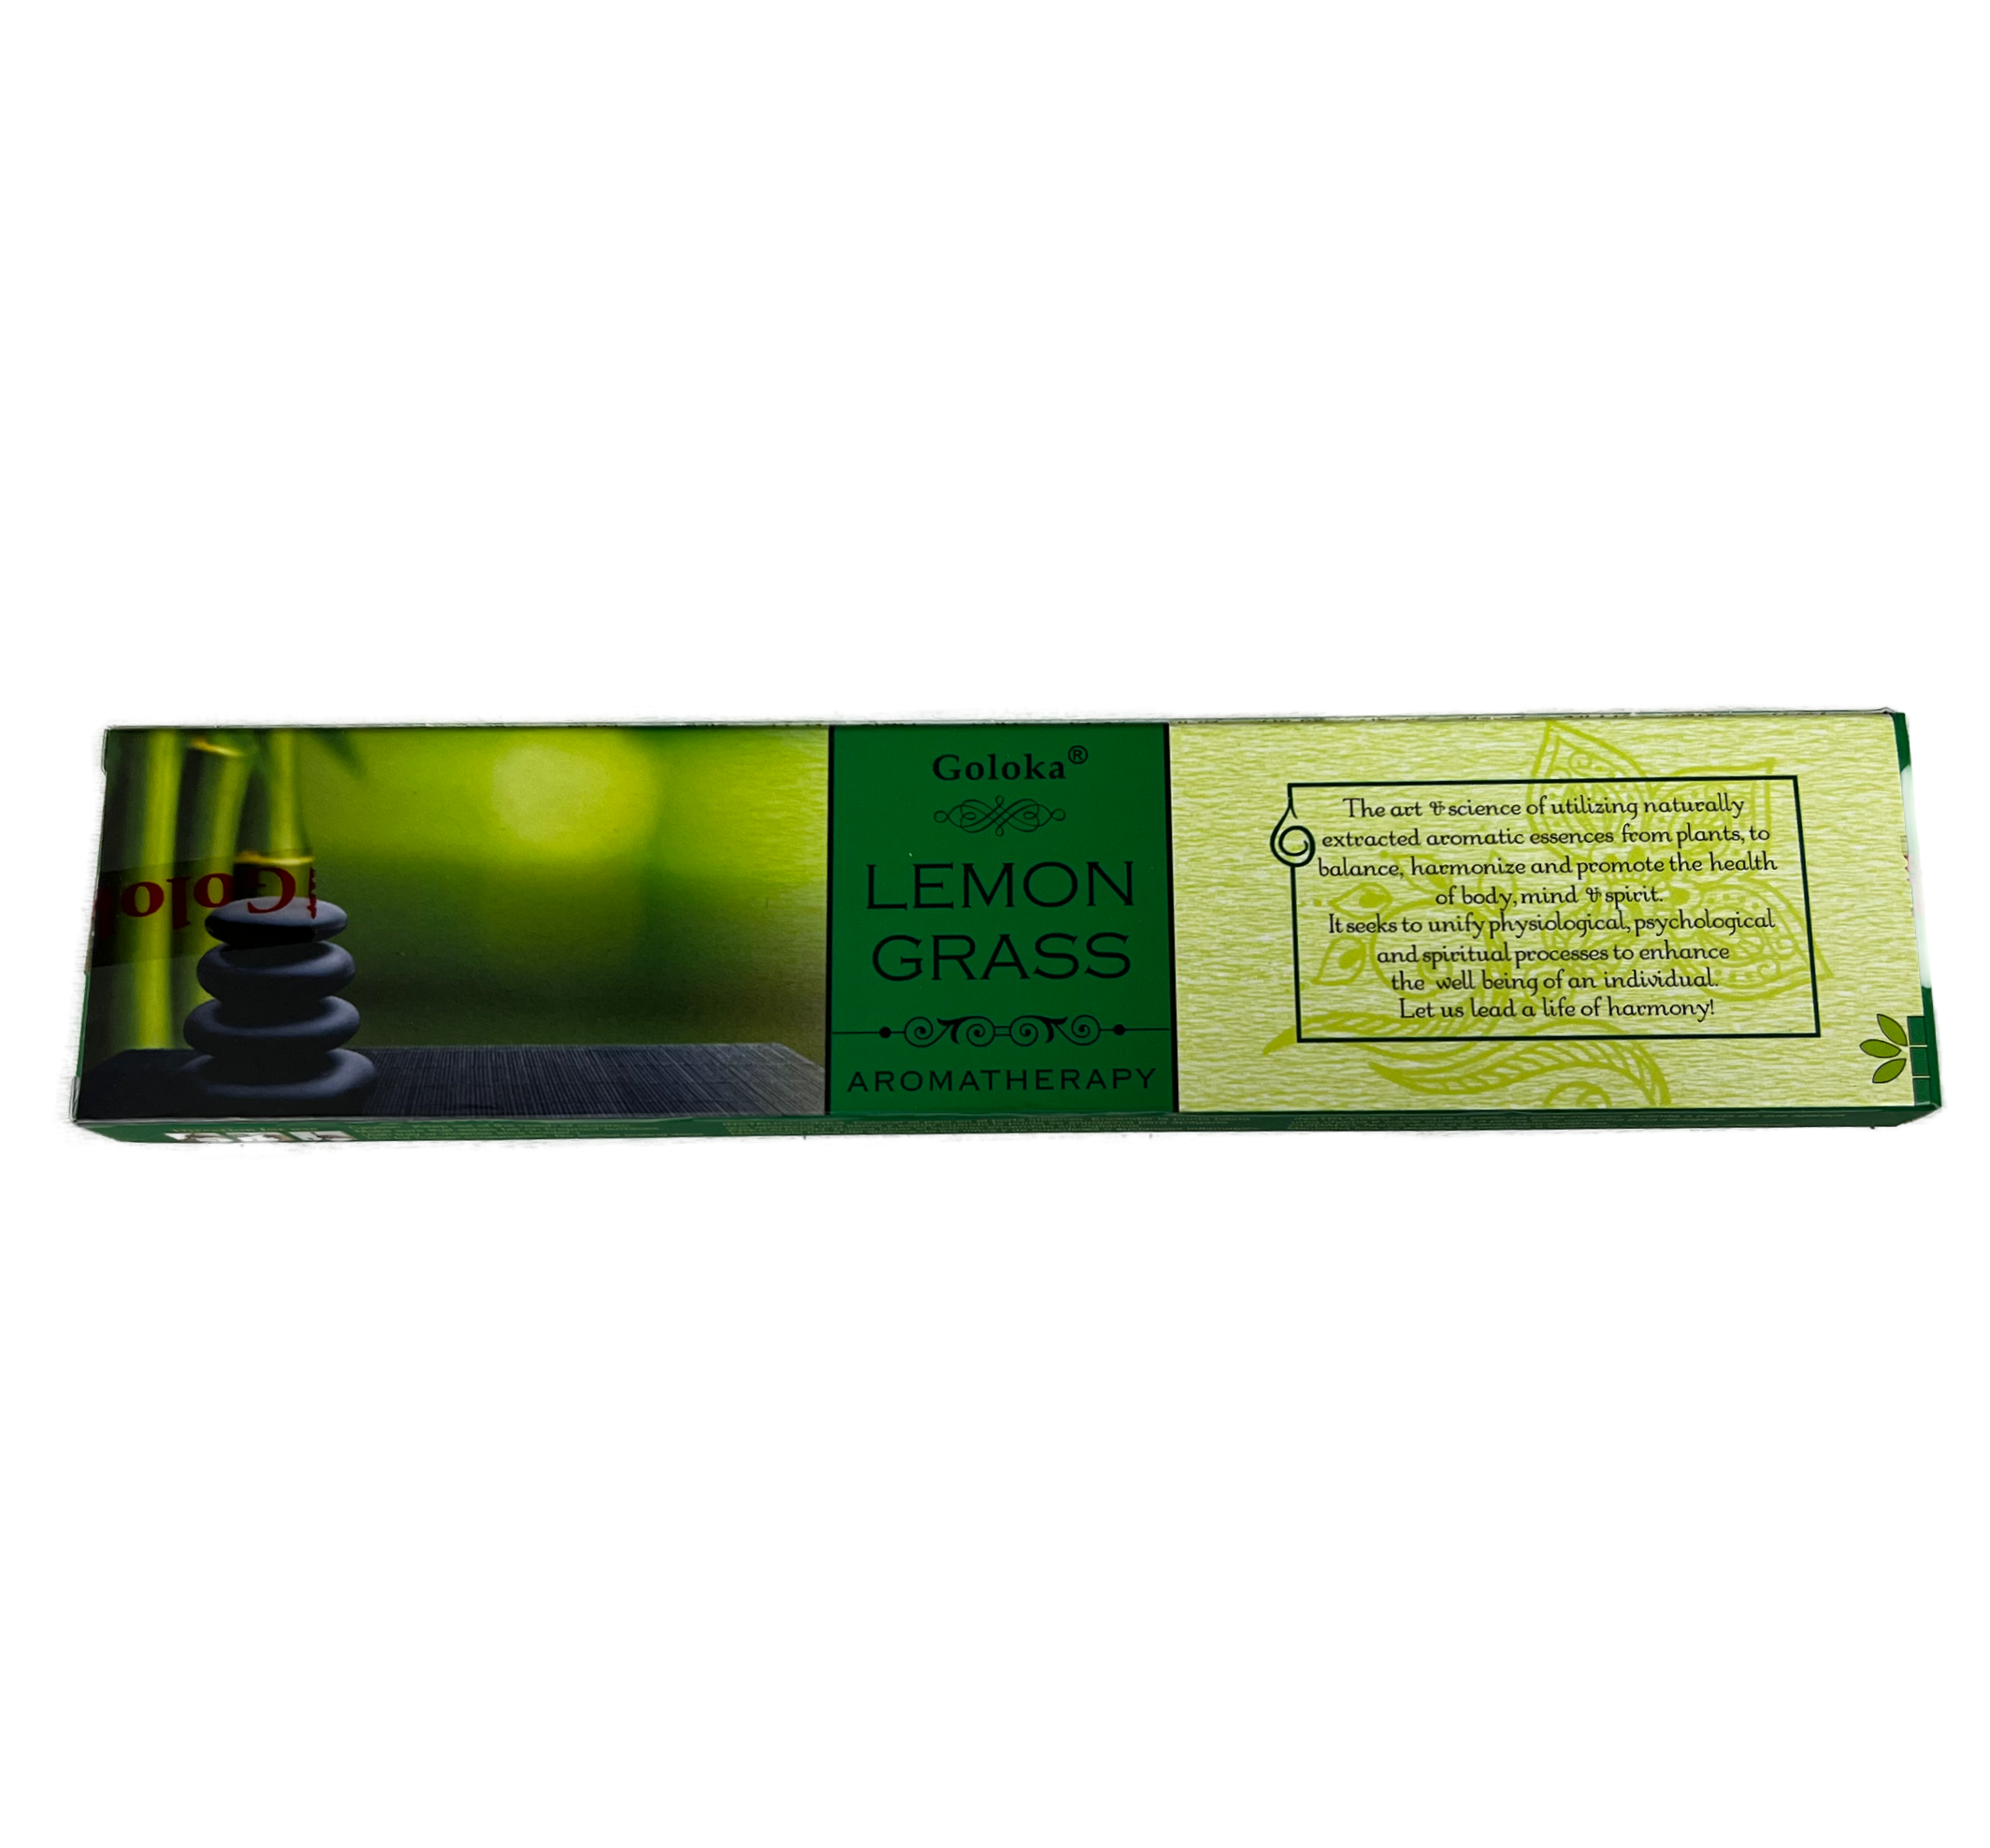 Lemon Grass Incense Sticks Back. The back cover is white and has two boxes. The left box is a square and in the square is a bunch of lemon grass bundled with a yellow knot. The rectangle has a title that says Botanical Name: Cymbopogon citrullus. The description is then listed.